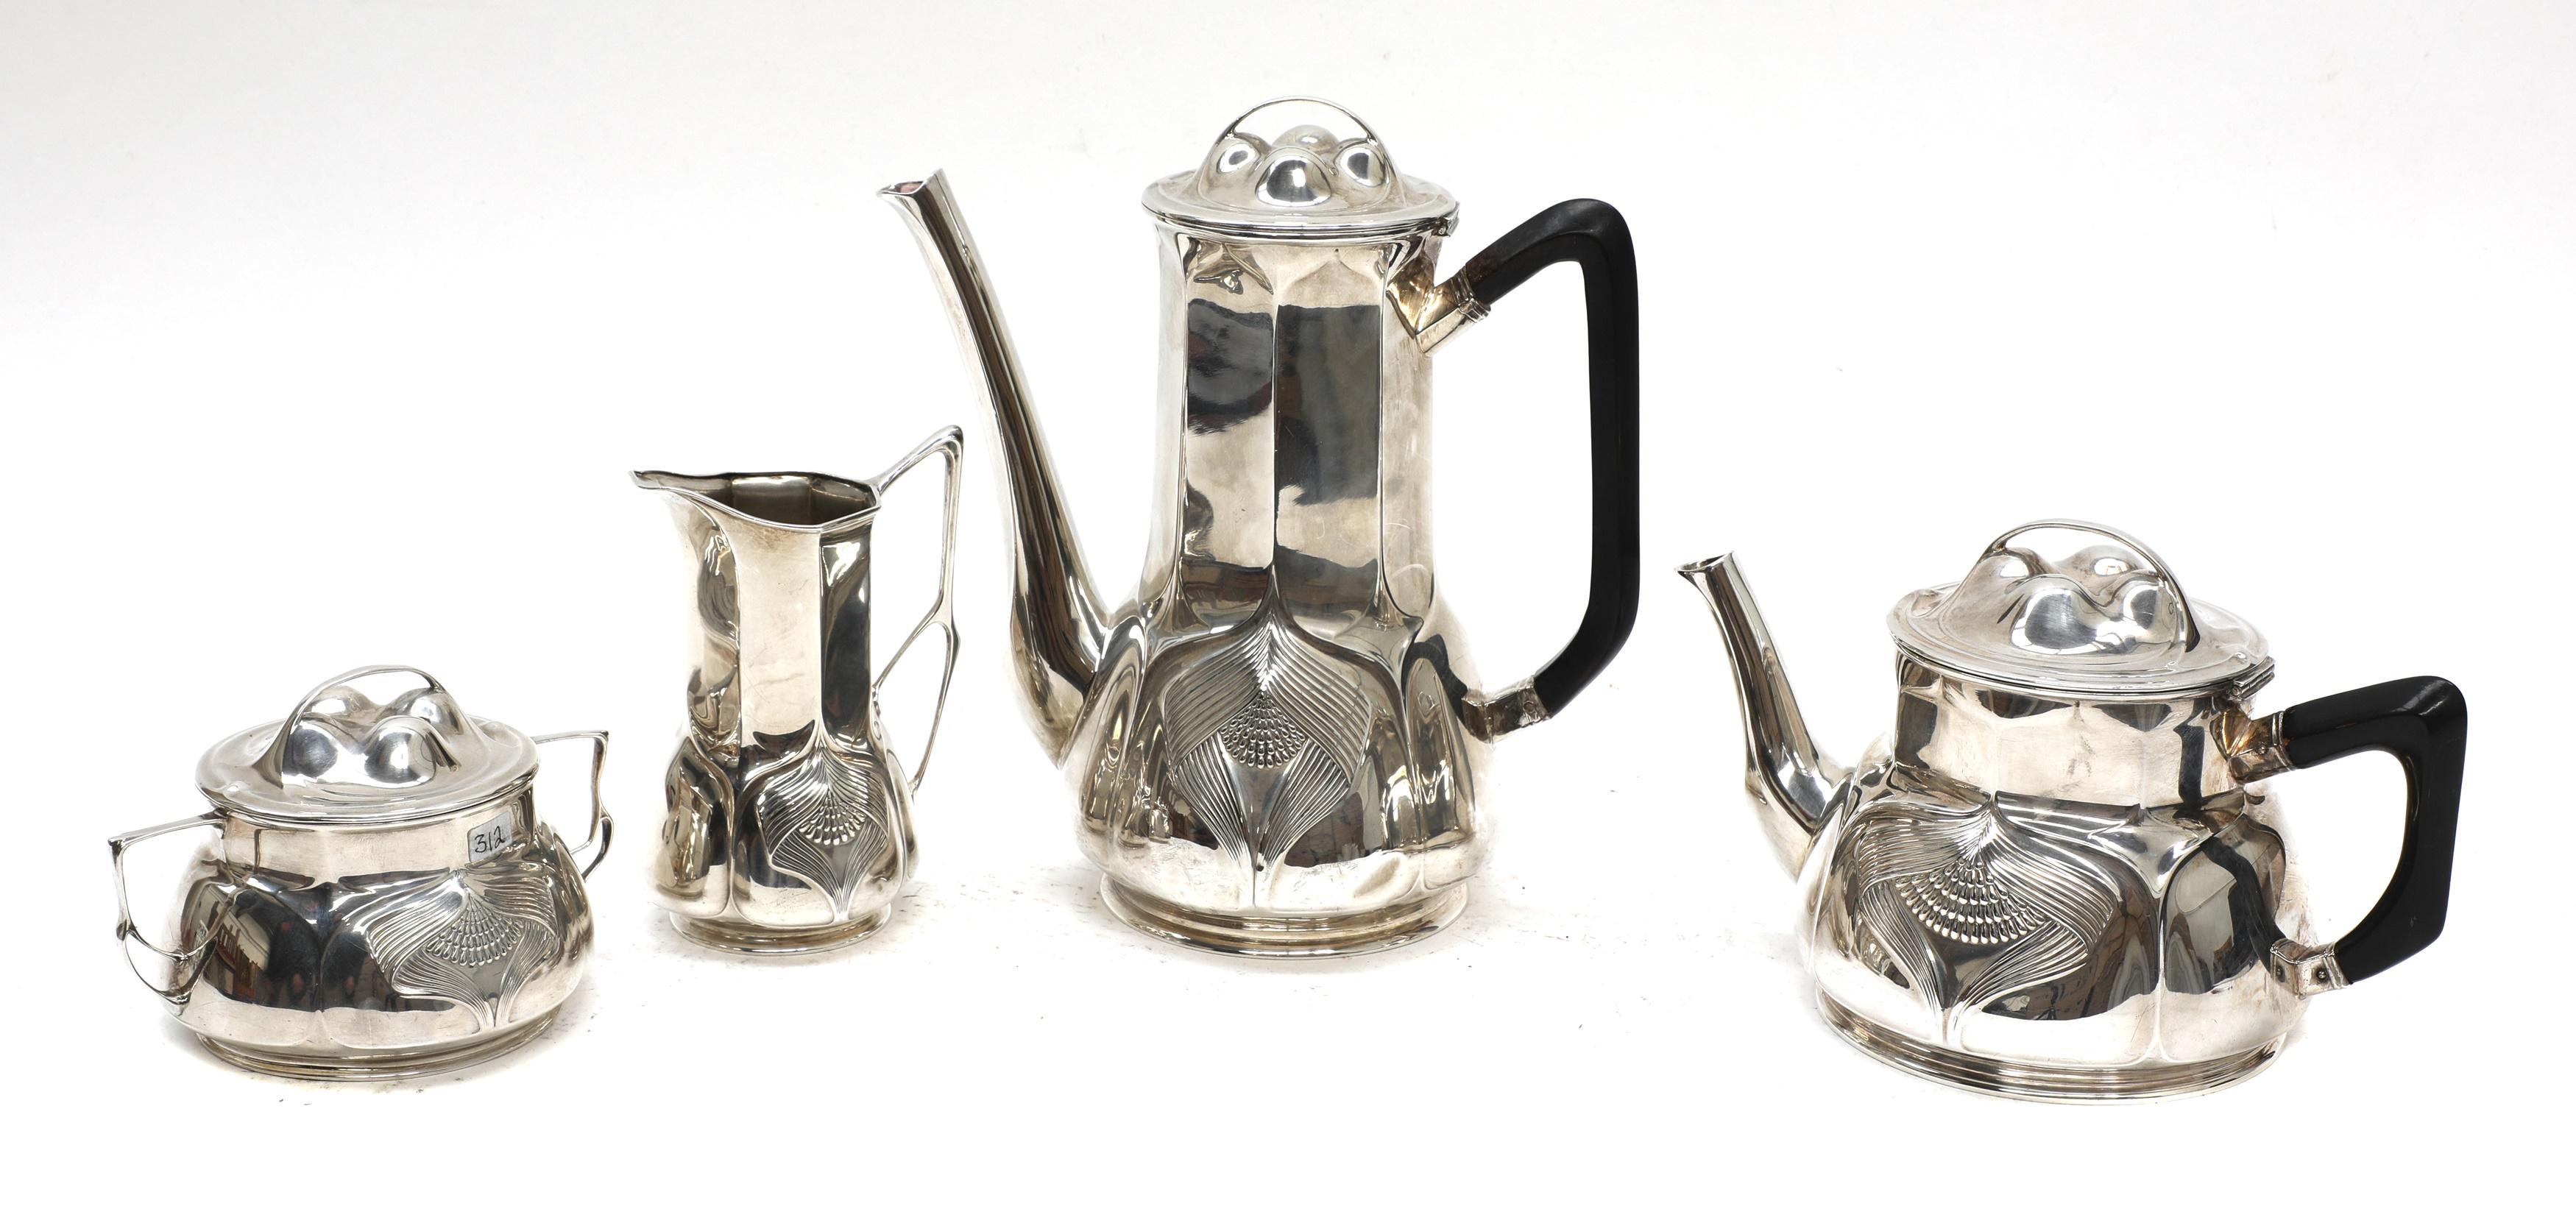 A stunning quality Orivit sterling silver Art Nouveau coffee and tea service.
Orivit produced sterling items for a very limited period just after the turn of the 20th century; a complete coffee service such as this is extremely rare. Art Nouveau